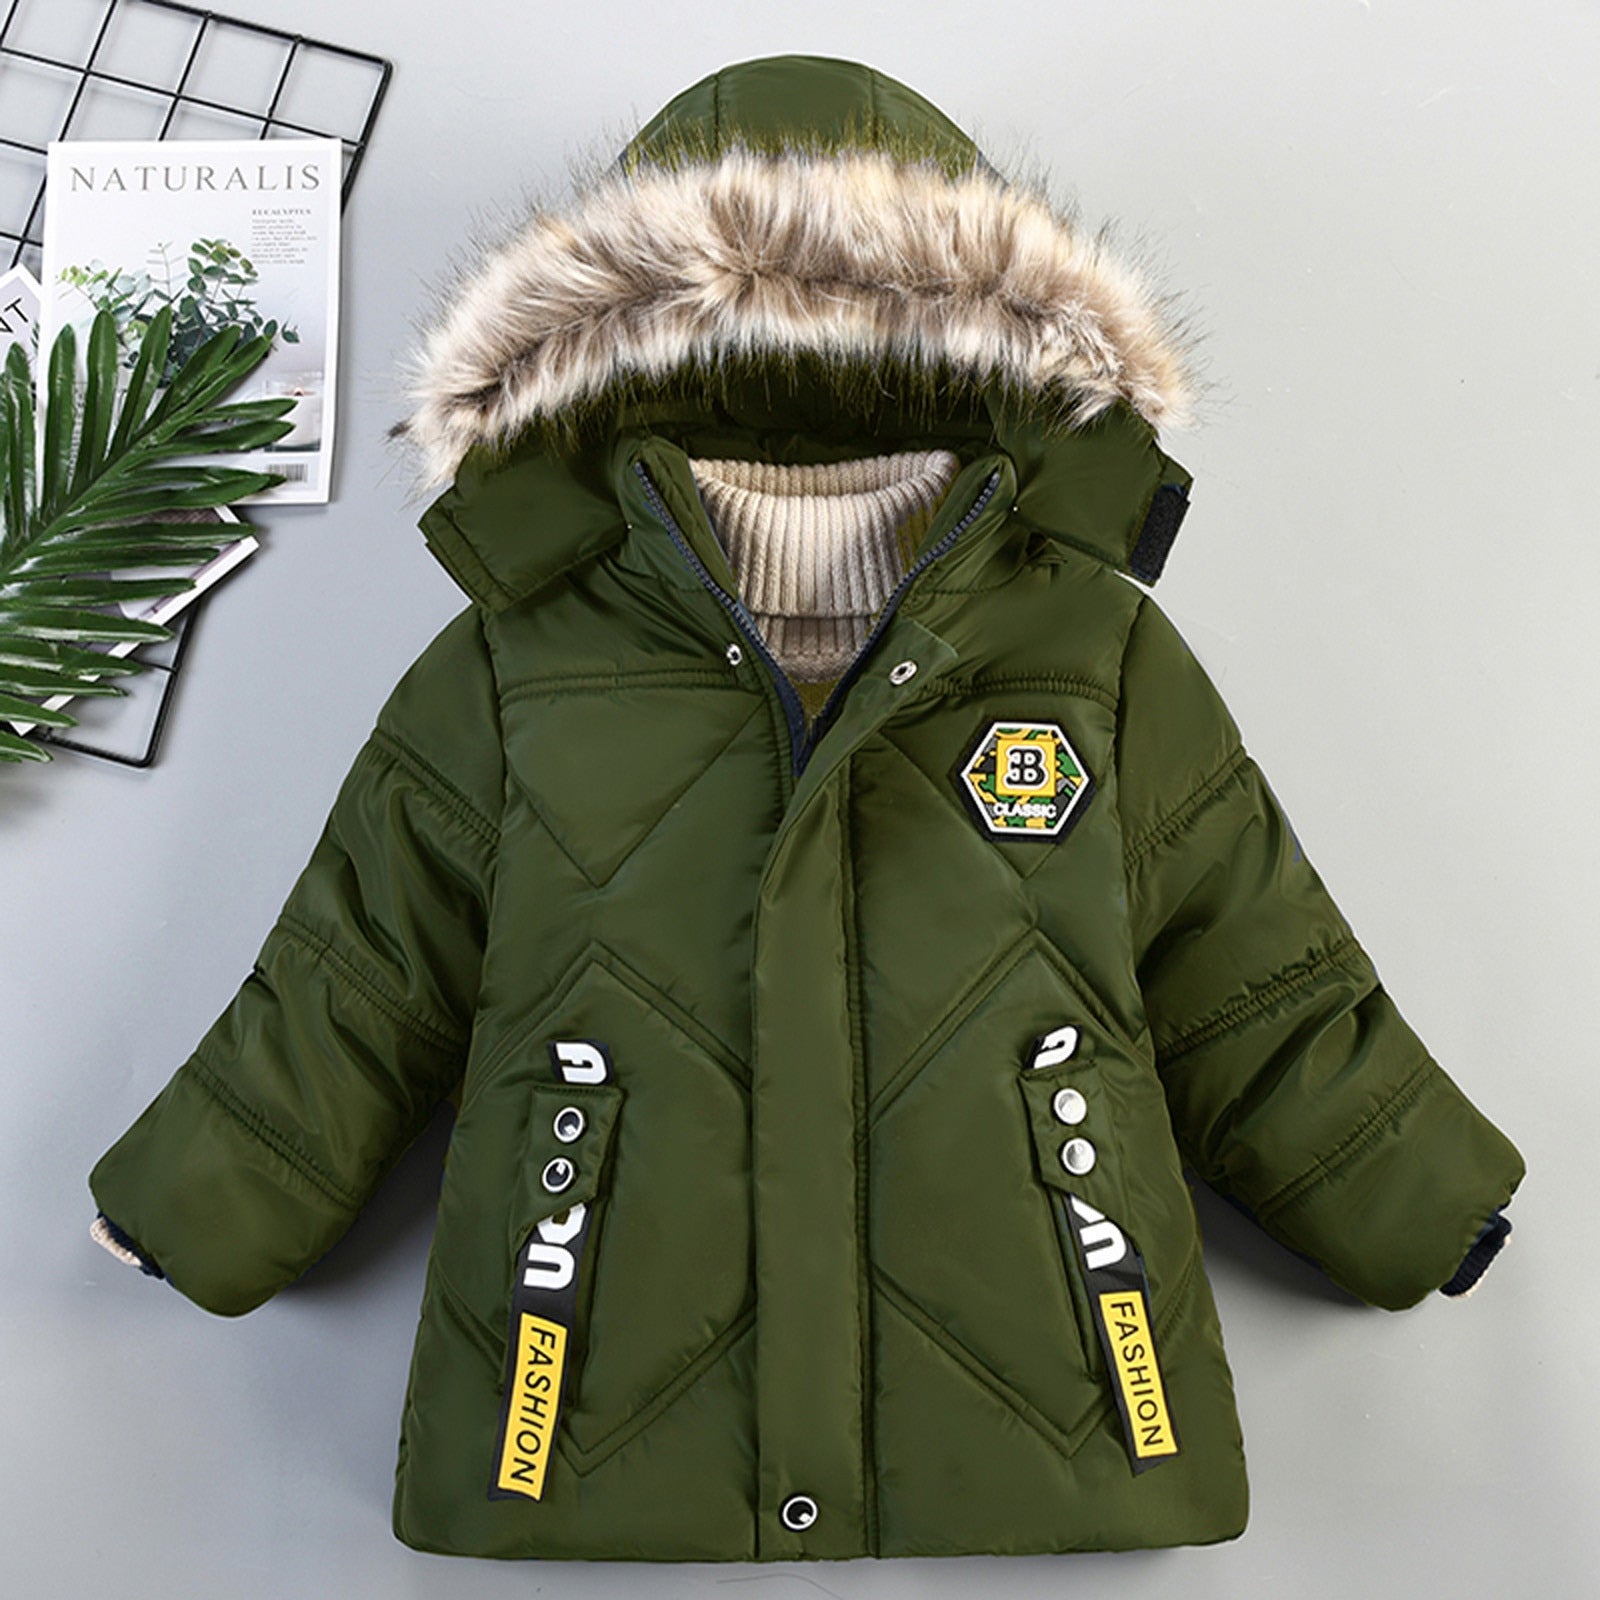 Toddler winter Letter Print Coats Boys Jacket Warm Hooded outerwear